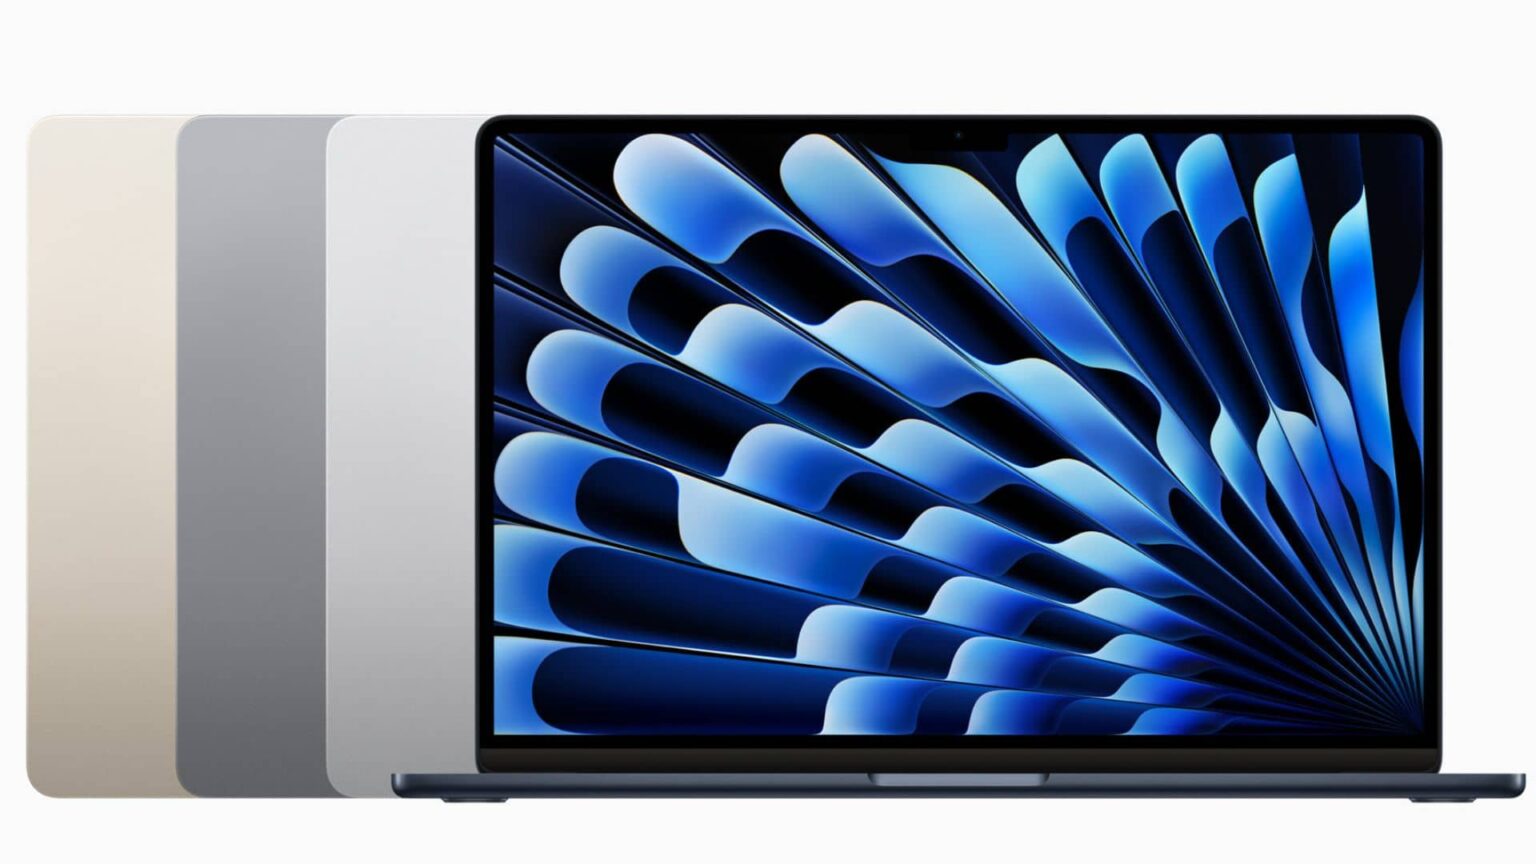 15inch MacBook Air Launched at WWDC 2023 TechieTechTech